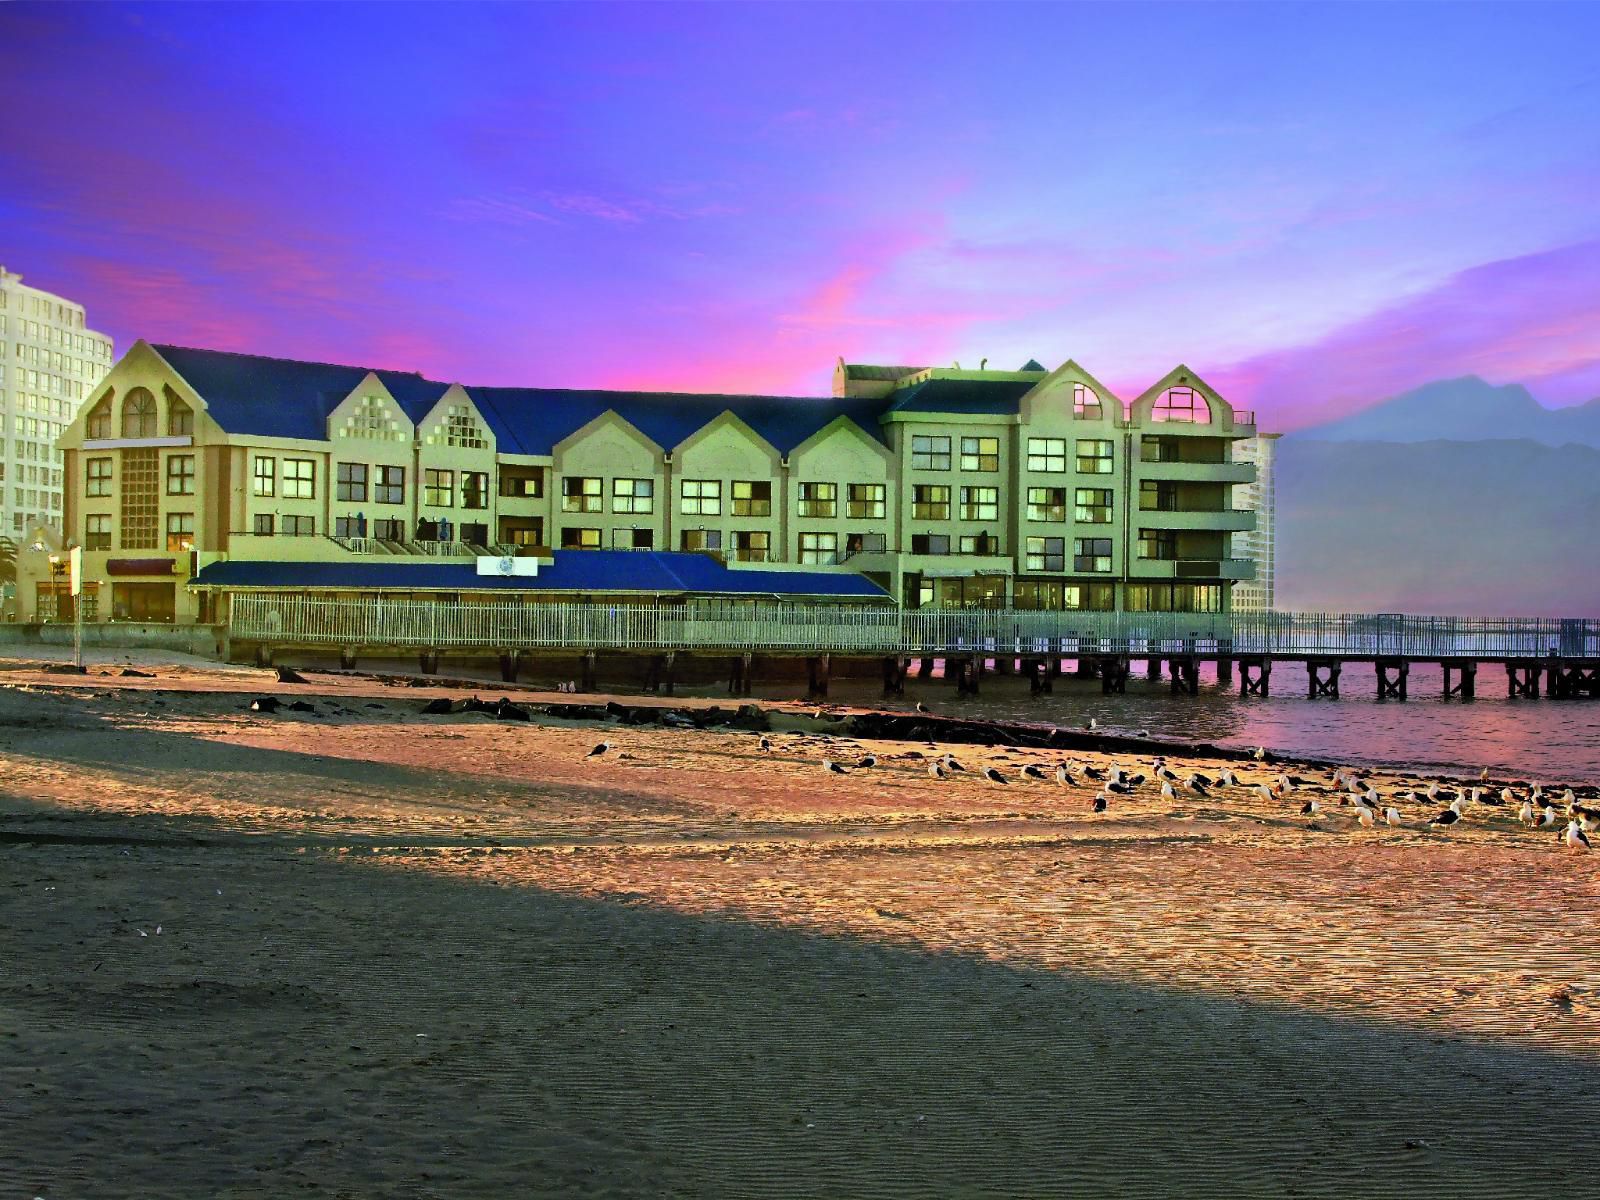 Strand Pavilion Van Ryneveld Strand Strand Western Cape South Africa Complementary Colors, Beach, Nature, Sand, Pier, Architecture